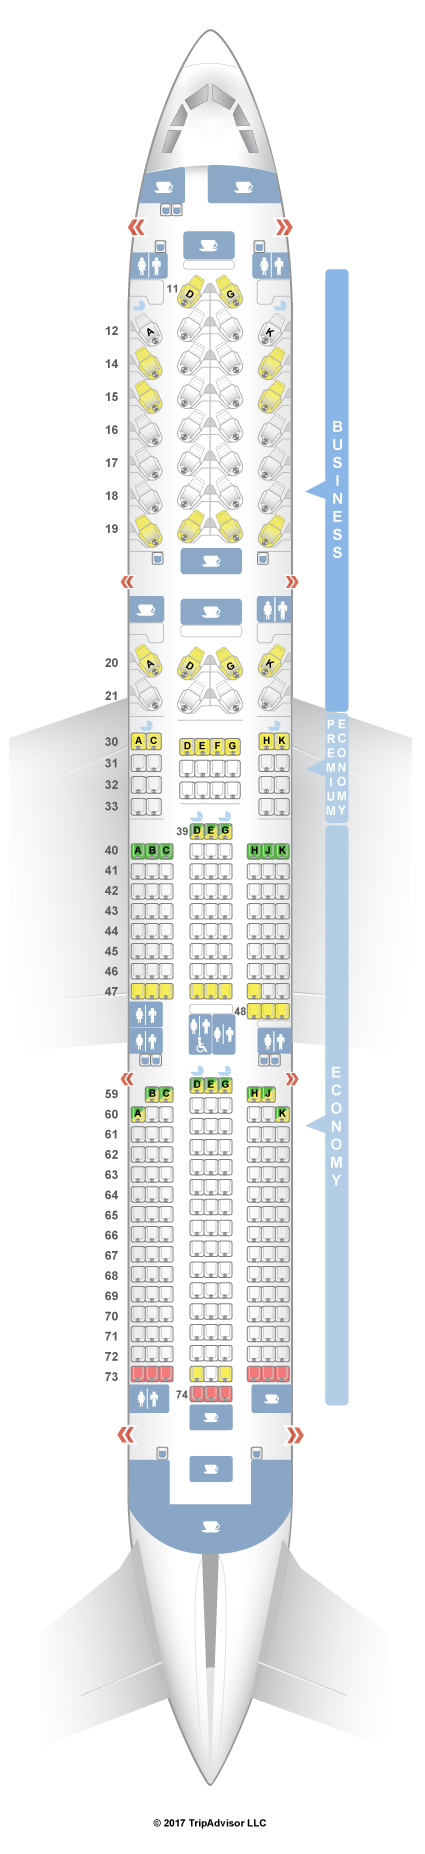 Cathay Pacific Airbus A350 Business Class Seat Map